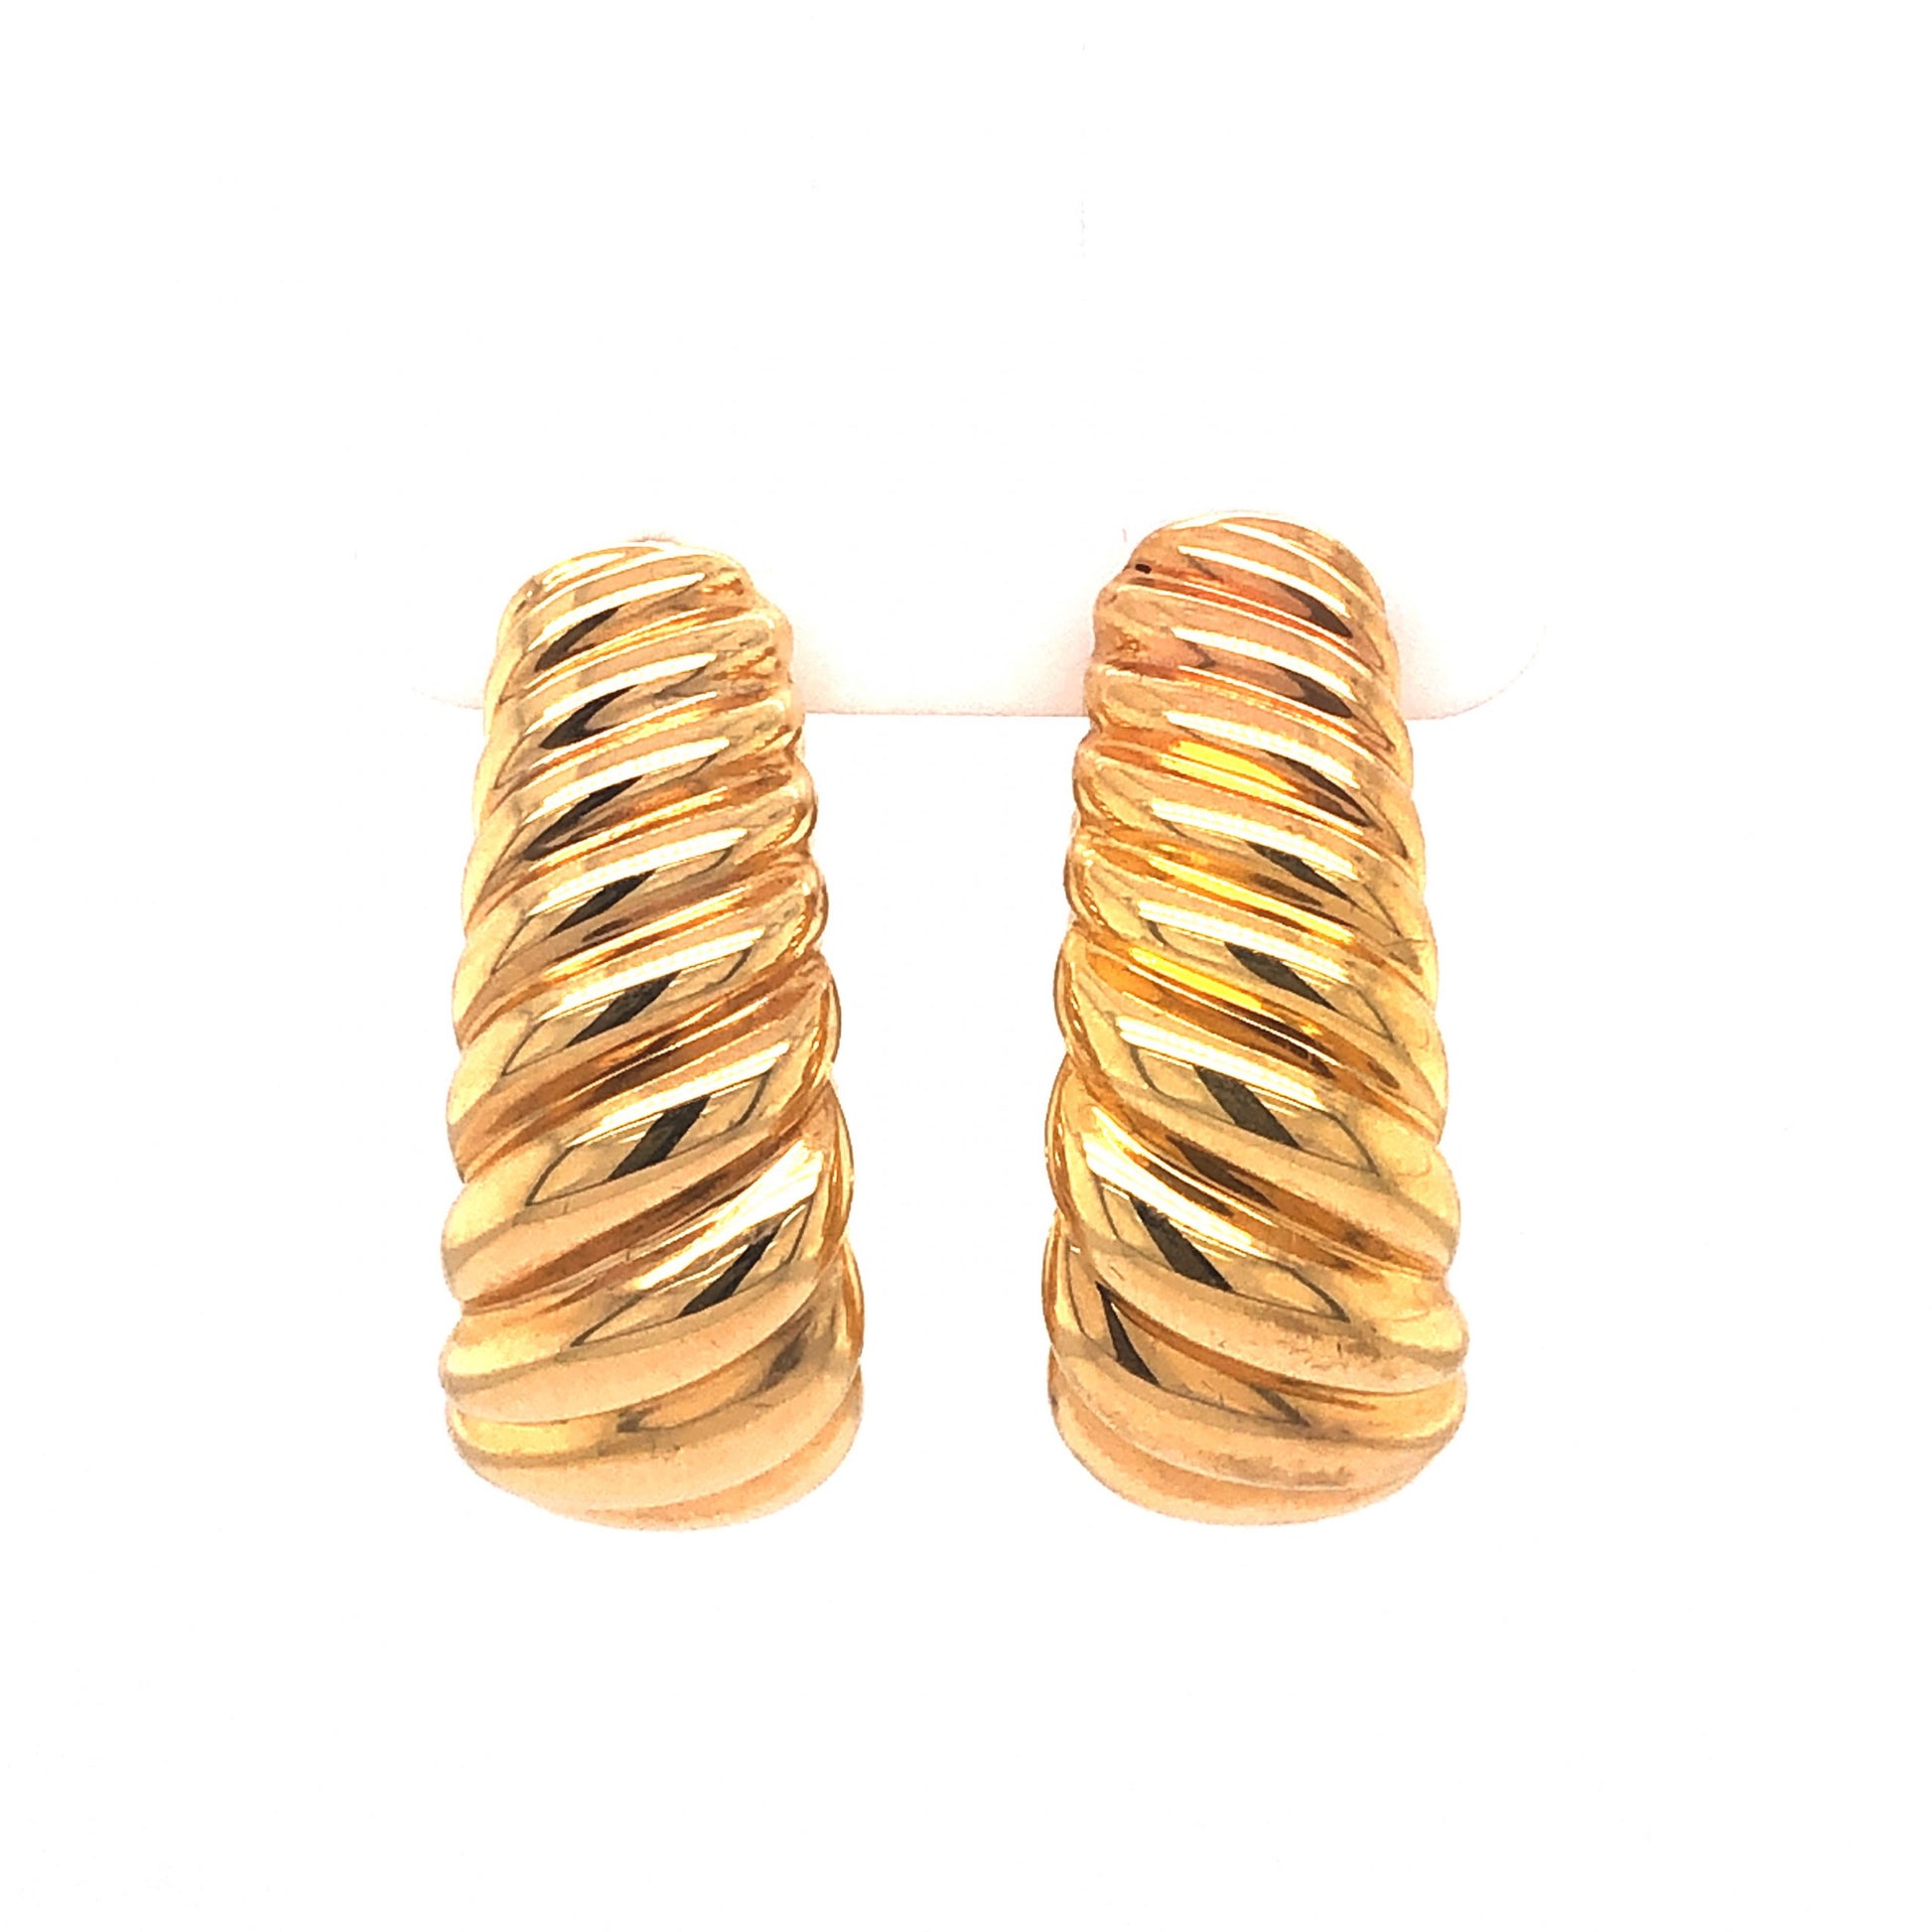 Rope Textured Hoop Earrings in 14k Yellow GoldComposition: 14 Karat Yellow Gold Total Gram Weight: 8.5 g Inscription: 14k MILOR ITALY
      